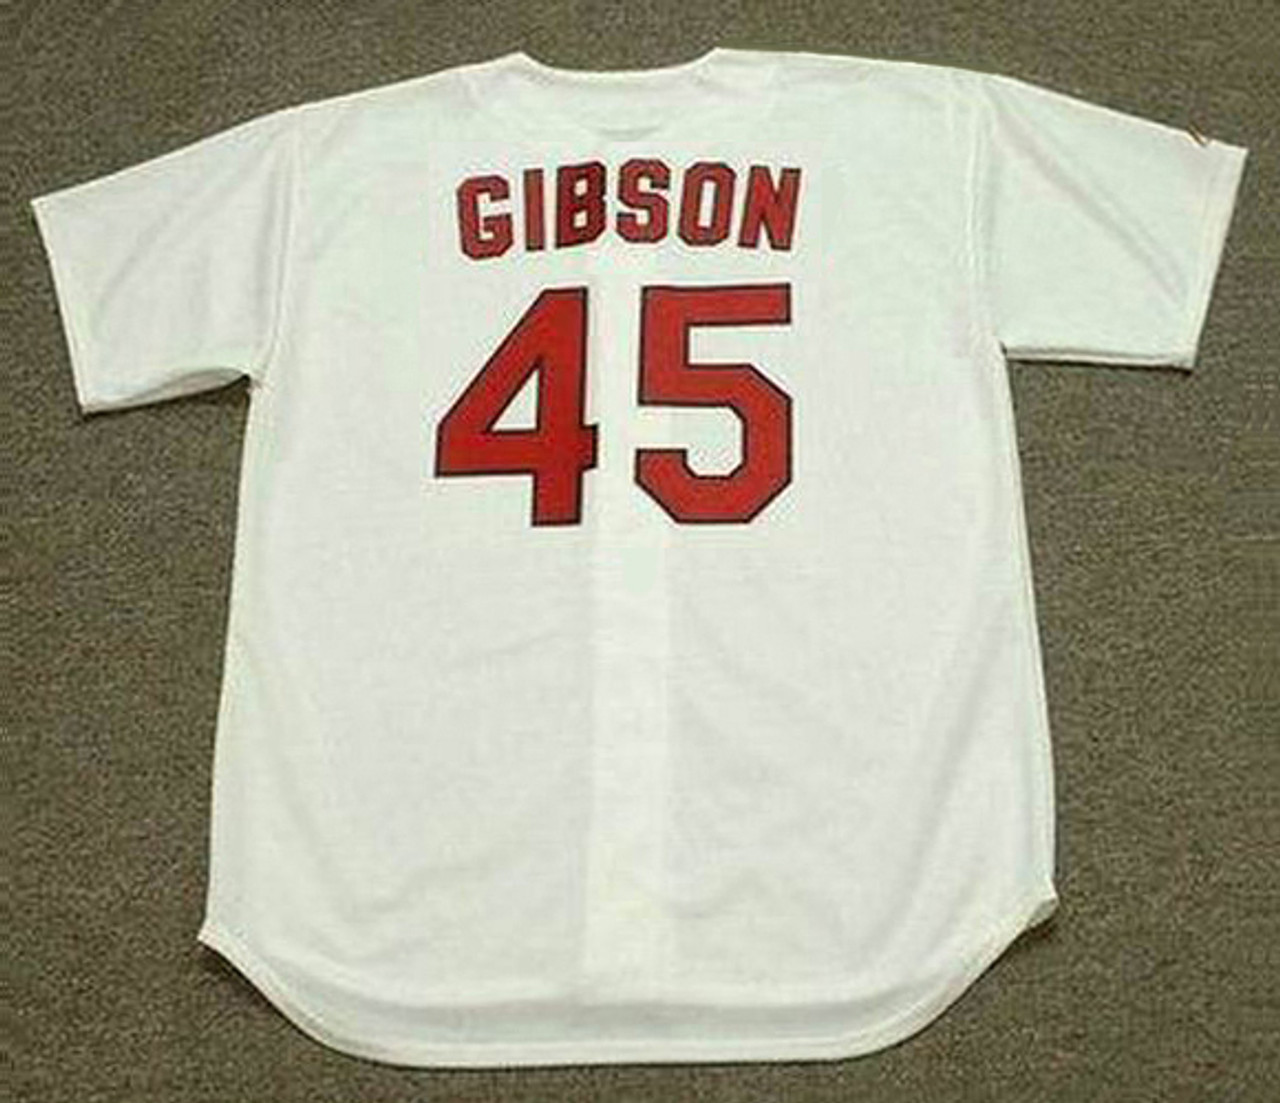 Bob Gibson 45 AUTOGRAPHED St. Louis Cardinals ROAD Jersey 